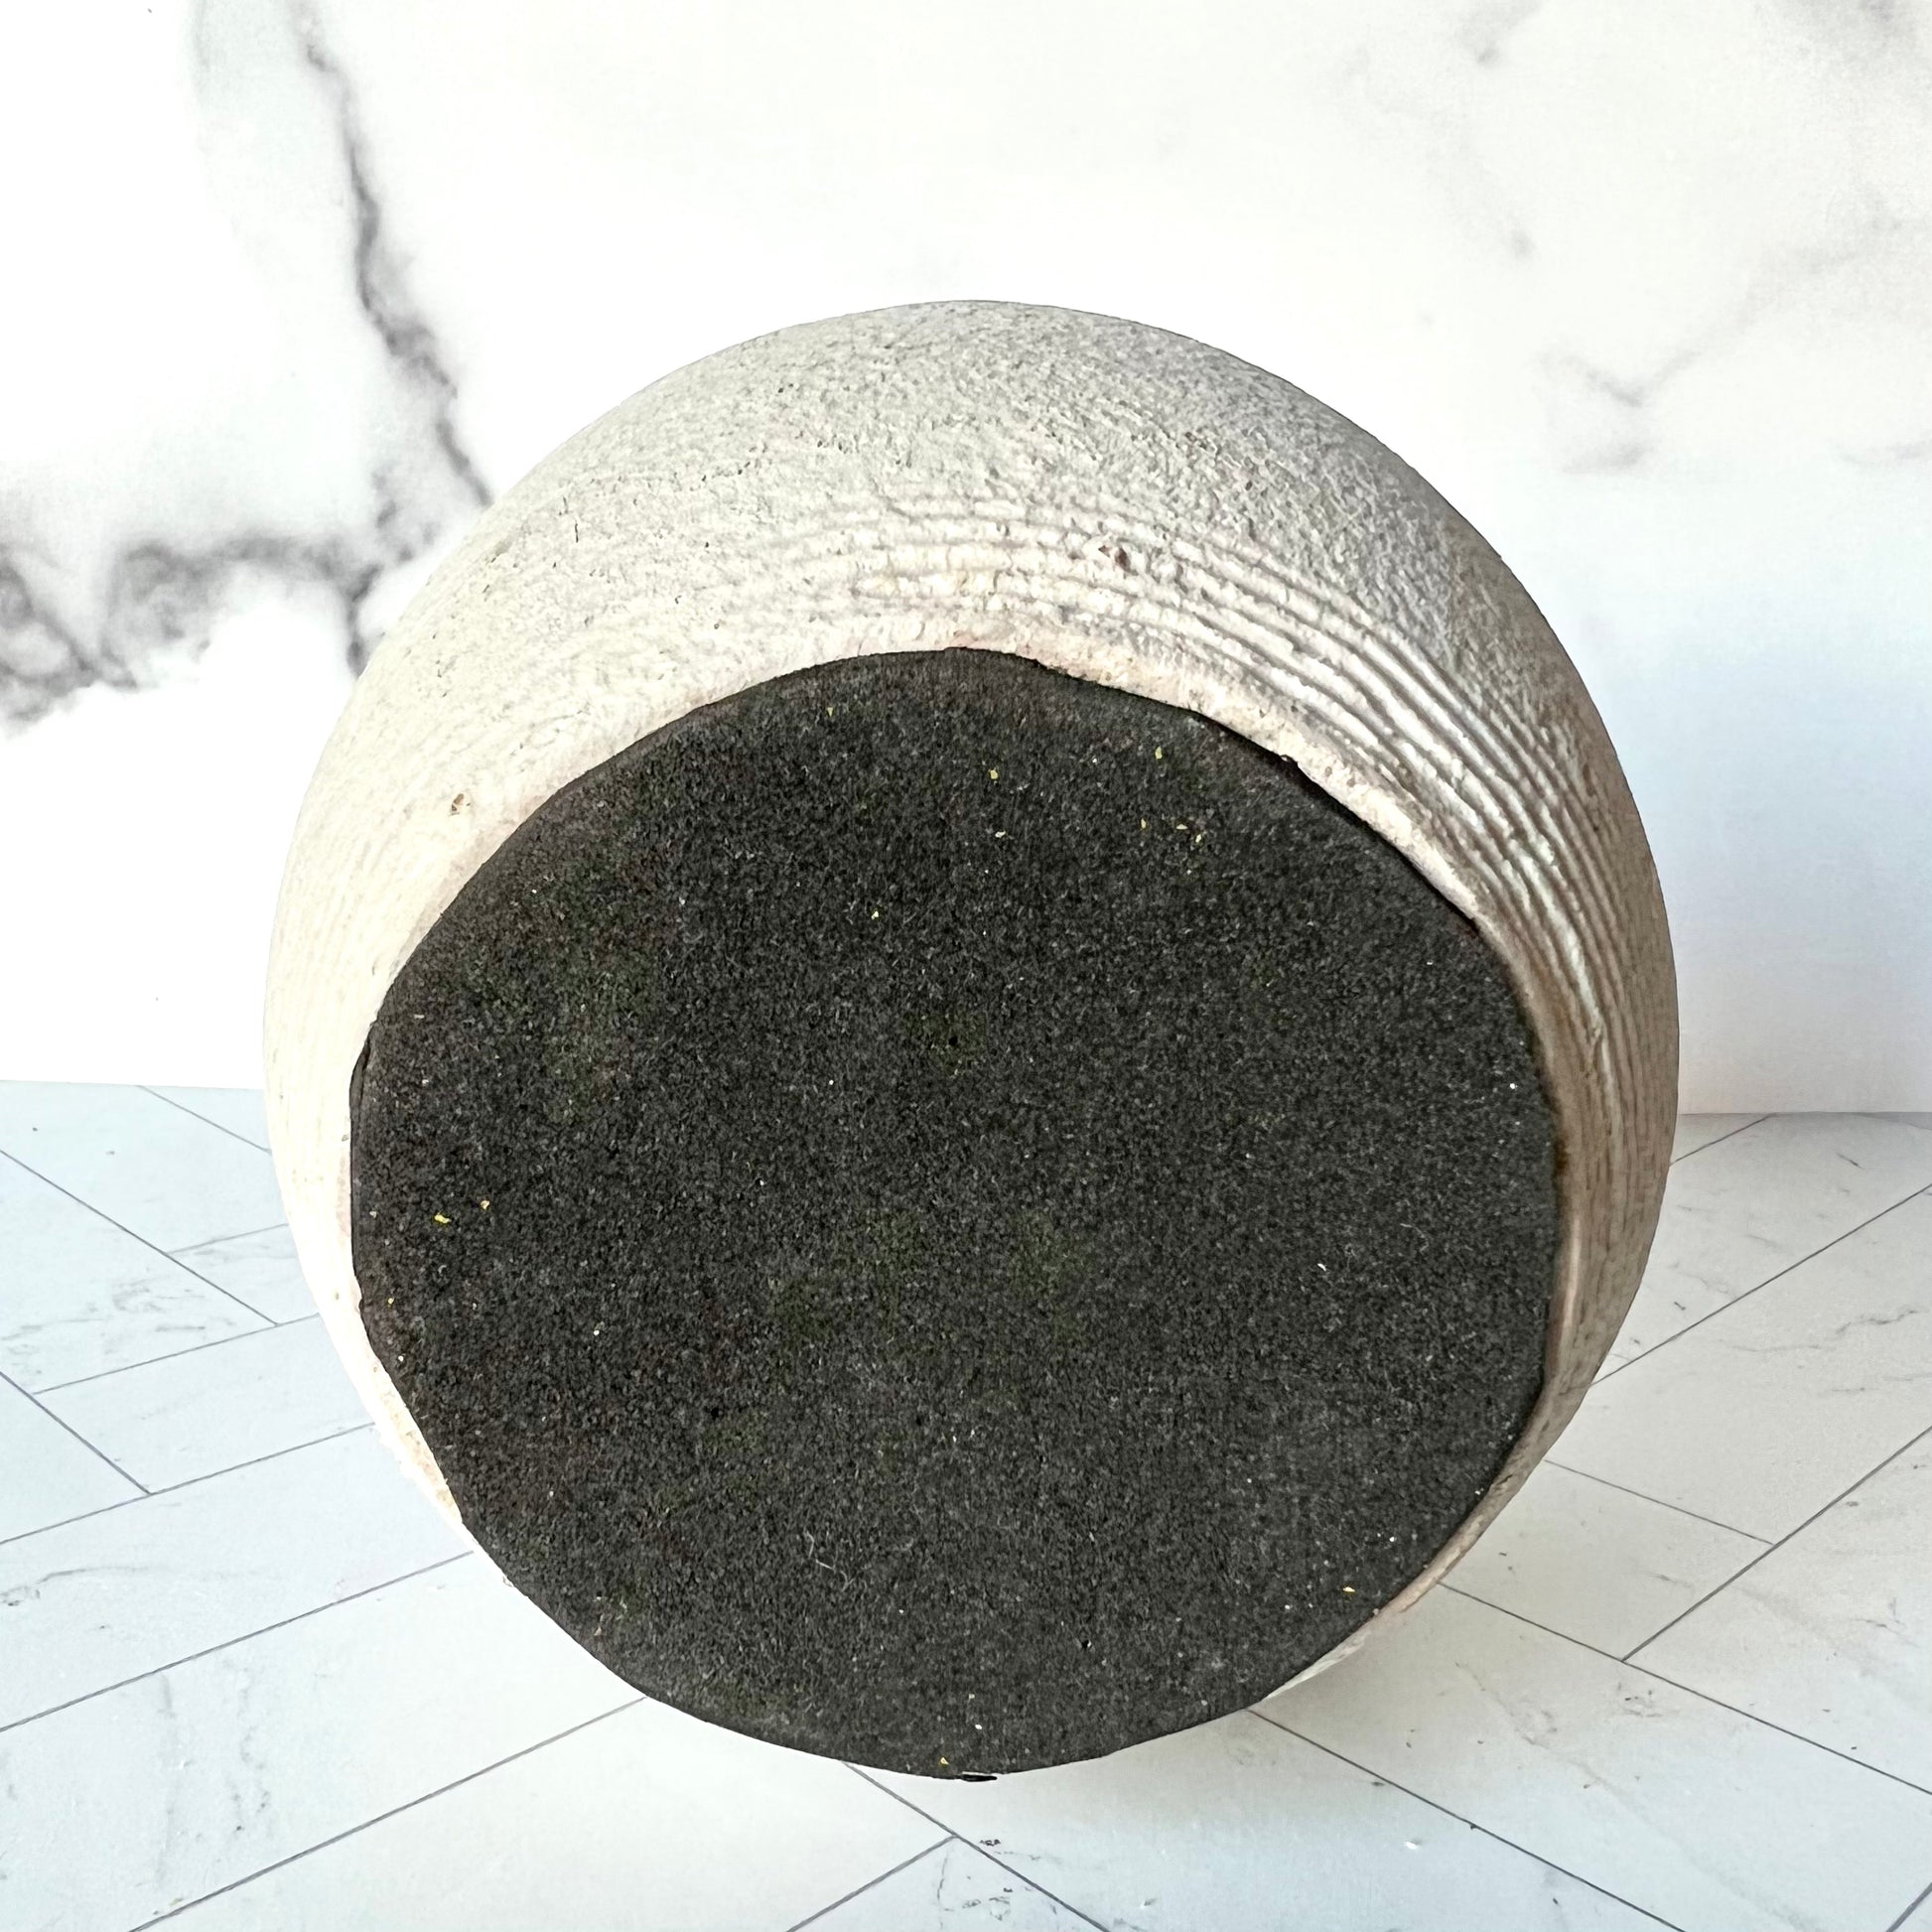 The bottom of a gray vase showing black foam